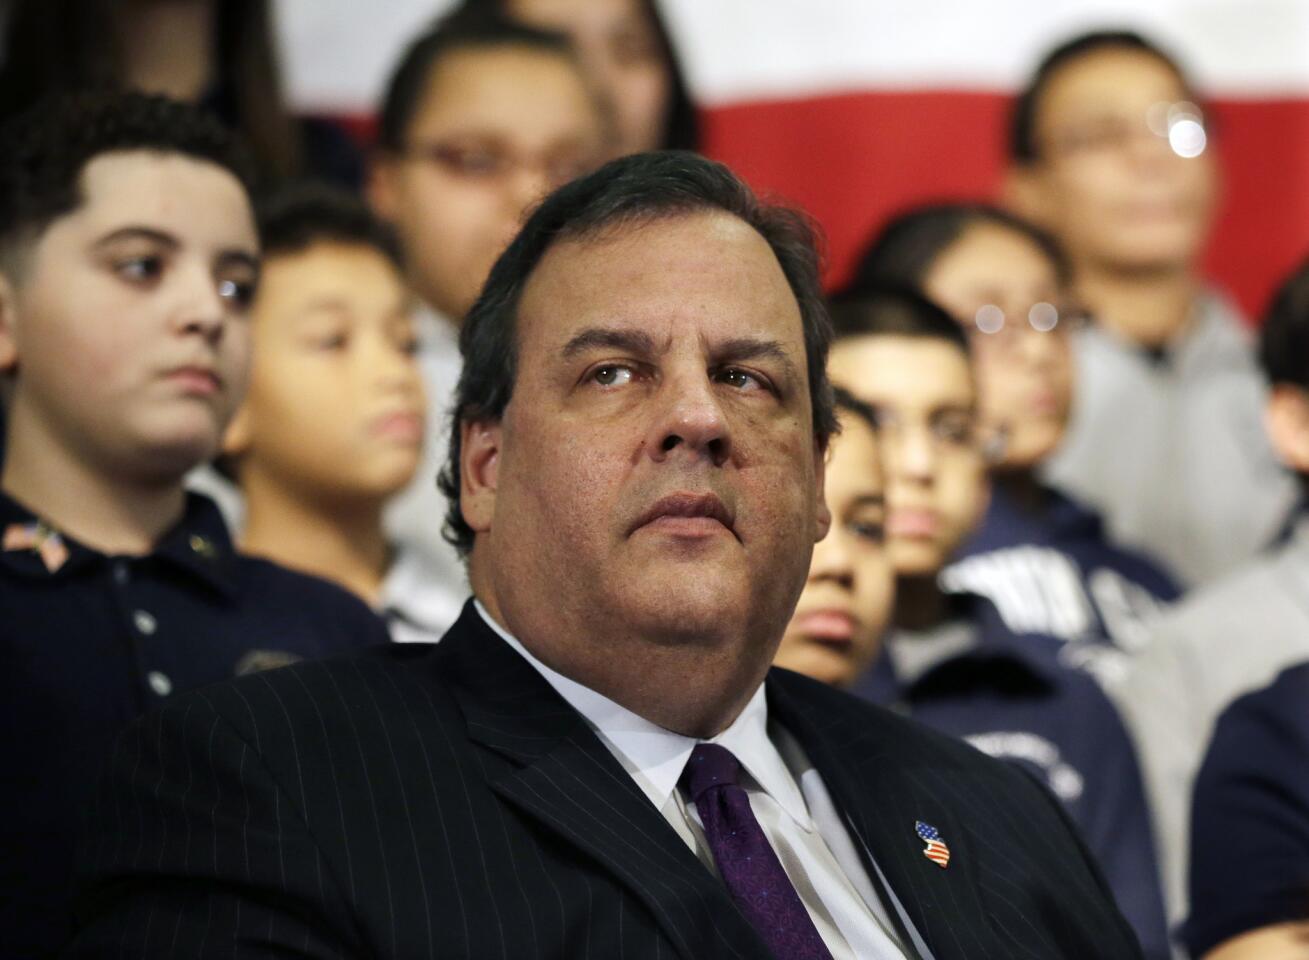 New Jersey Gov. Chris Christie has a reputation. Actually, he has several reputations. One of the less savory ones is that of a bully. In December, the New York Times tallied up a few of his nastier moments. The story is eerily prescient, mentioning allegations that Christie aides ordered the traffic tie-up on the George Washington Bridge in September, charges that at the time Christie described as preposterous. On Wednesday, those nasty allegations got a little less preposterous. And so the governor talked the talk of the unwitting and wronged victim. In a statement, he said: "What I've seen today for the first time is unacceptable. I am outraged and deeply saddened to learn that not only was I misled by a member of my staff, but this completely inappropriate and unsanctioned conduct was made without my knowledge." Go ahead, tally it up: In just two sentences, he managed to slip in three references that he didn't know about the conduct and four references that he was really mad about it. Those aides may not tell the boss everything, but they sure can write press releases!